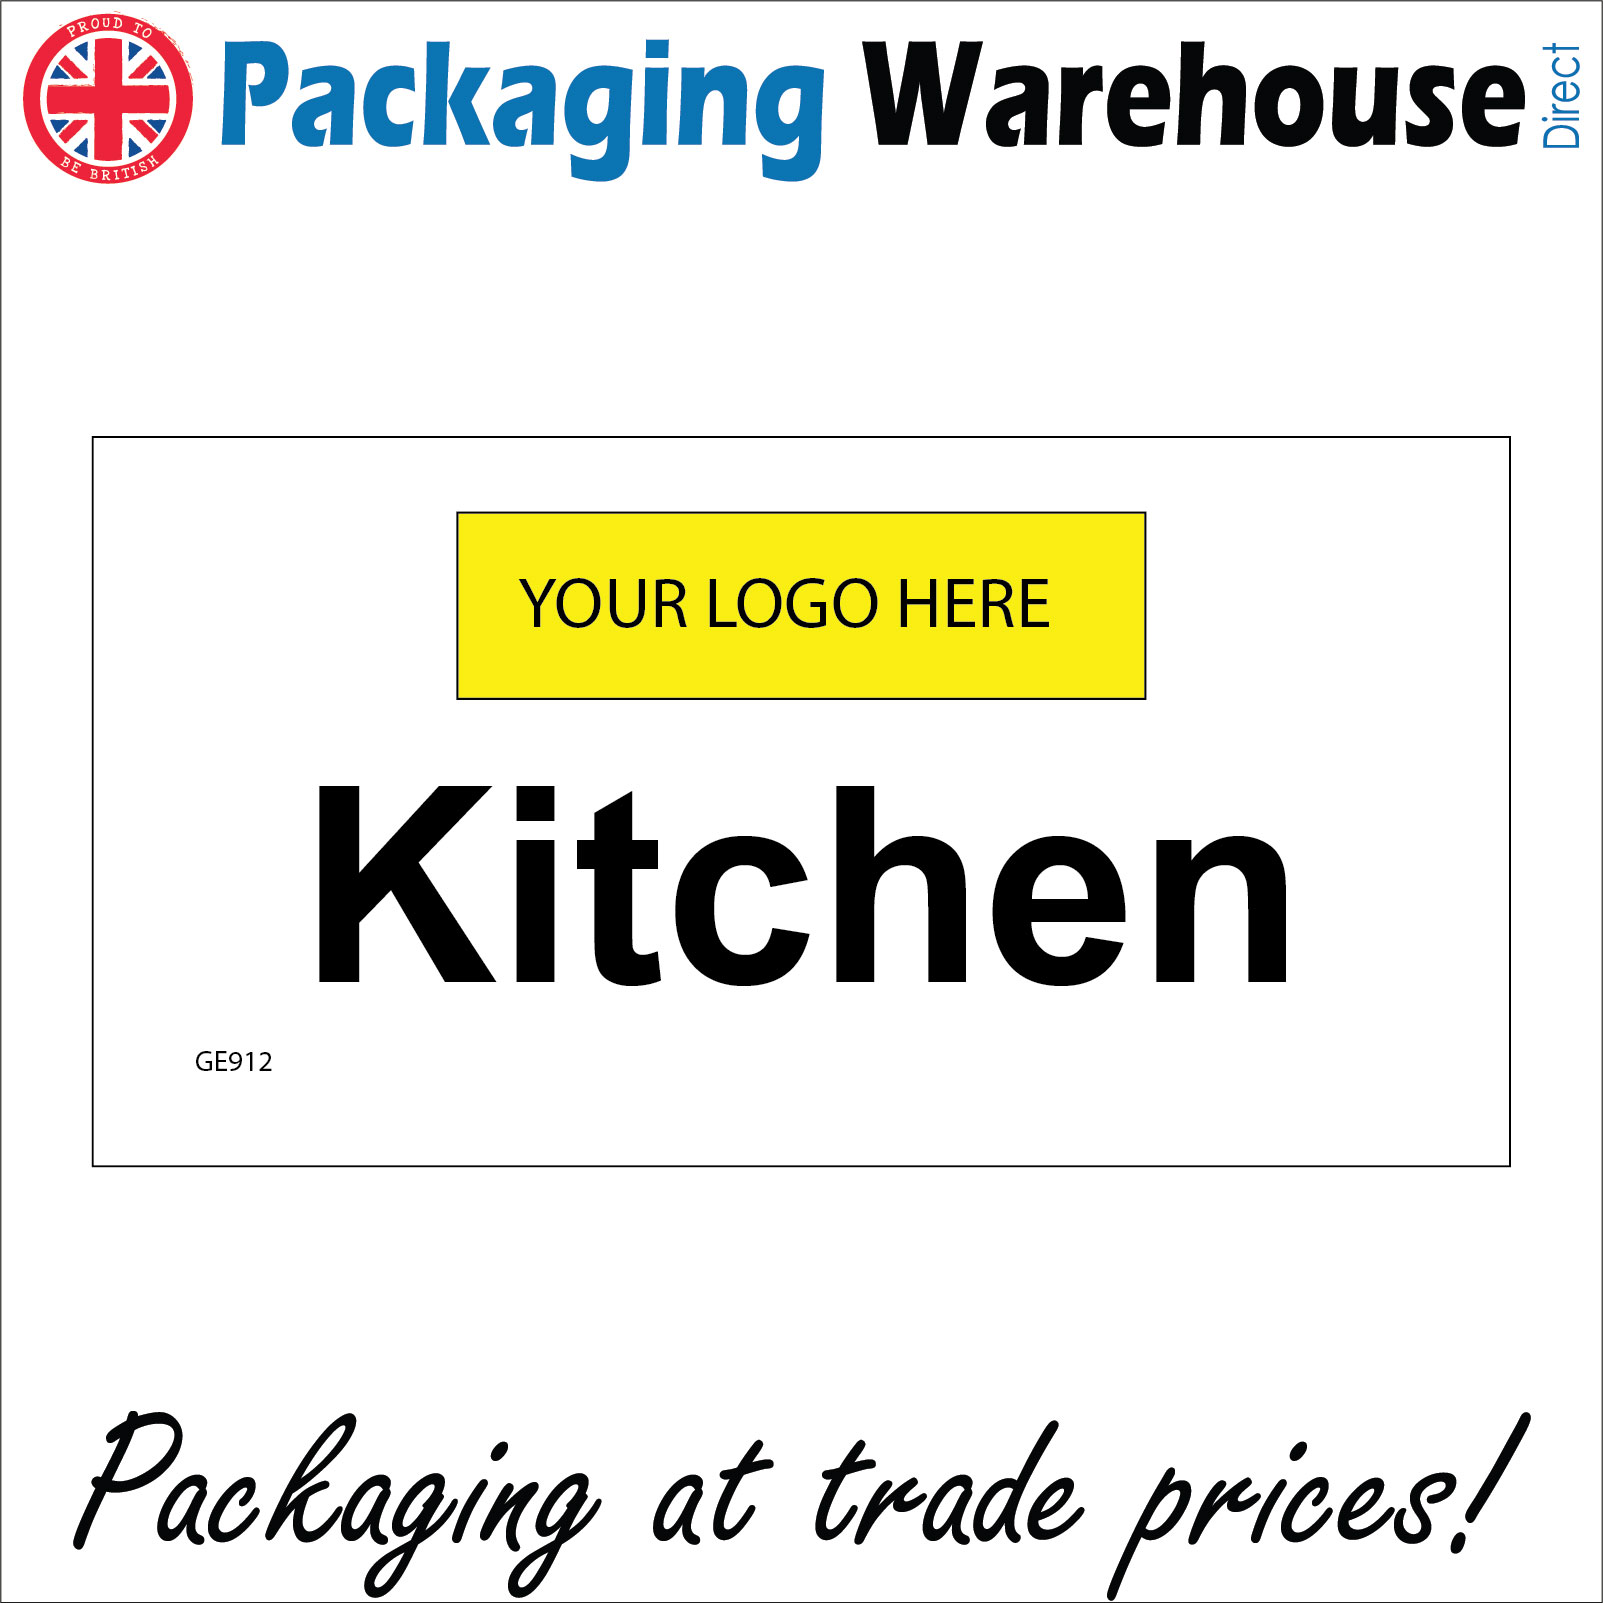 GE912 KITCHEN YOUR LOGO SIGN COMPANY CHANGE COOK UTENSILS OVEN BAKE SCULLERY